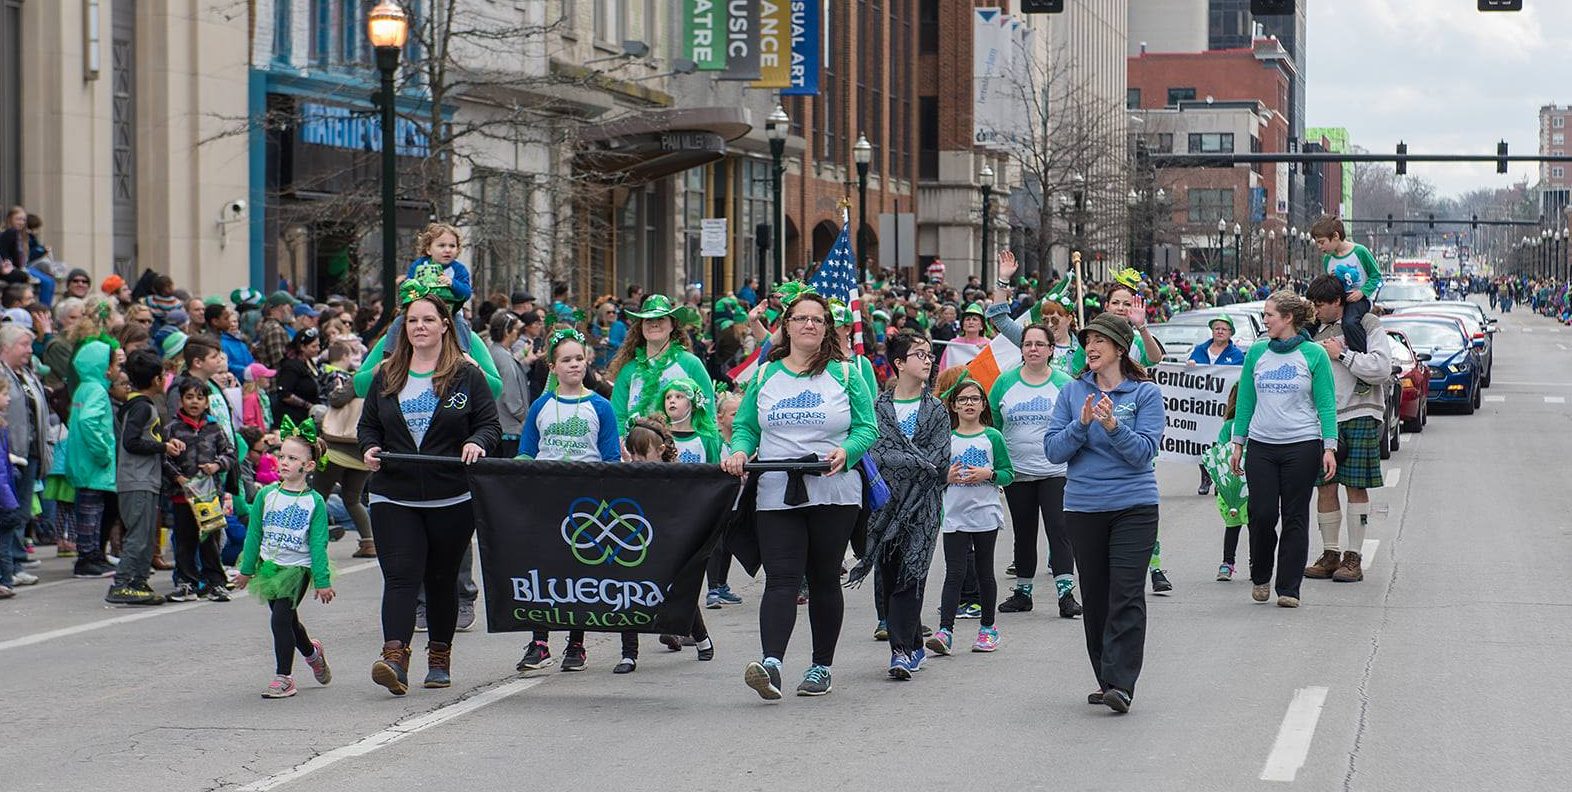 2019’s Irish dance March madness in Lexington is upon us